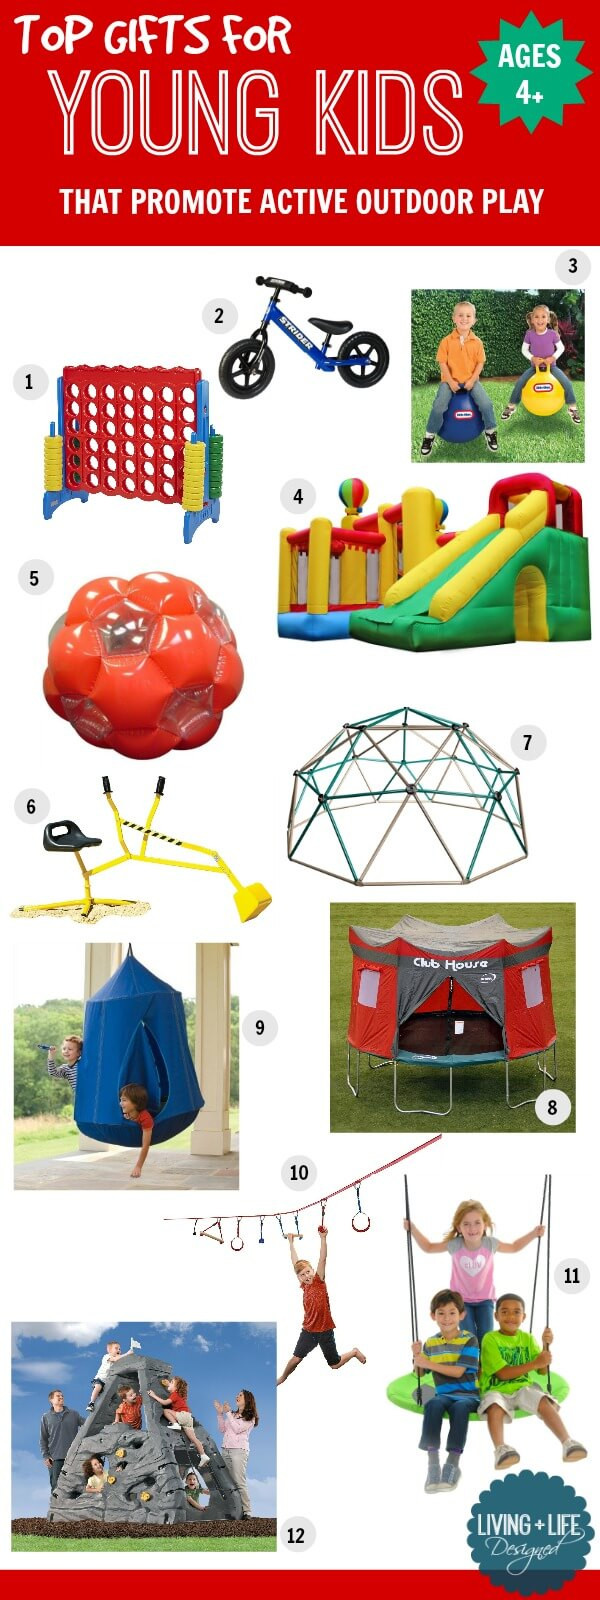 Kids Camping Gifts
 Gift Ideas for Young Kids Ages 4 That Promote Active